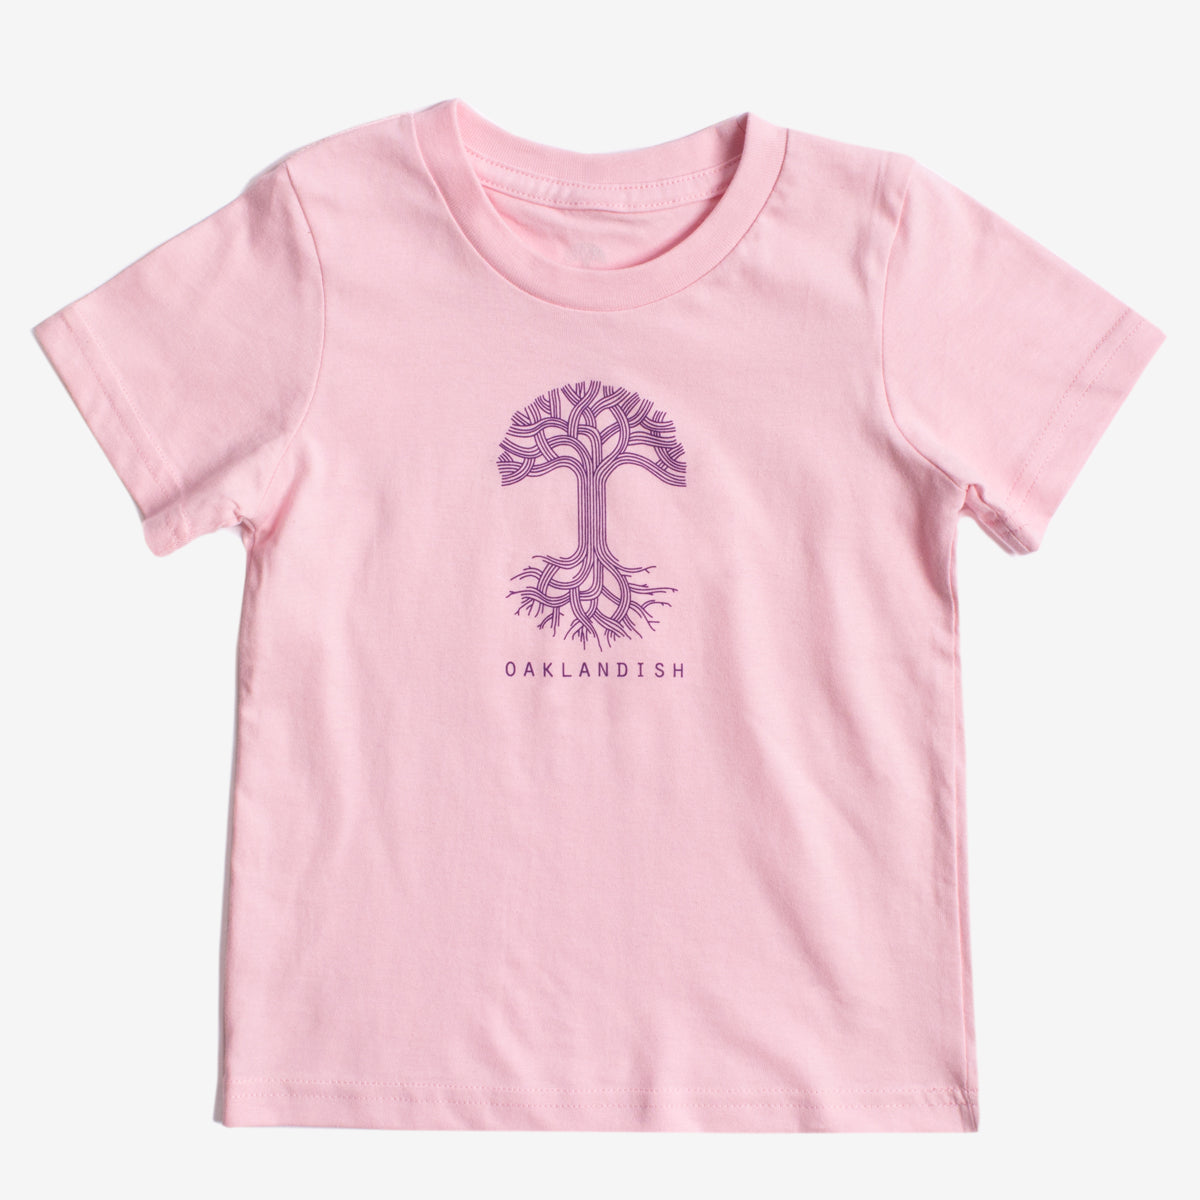 Pink toddler-sized t-shirt with purple Oaklandish tree logo and wordmark on the chest.